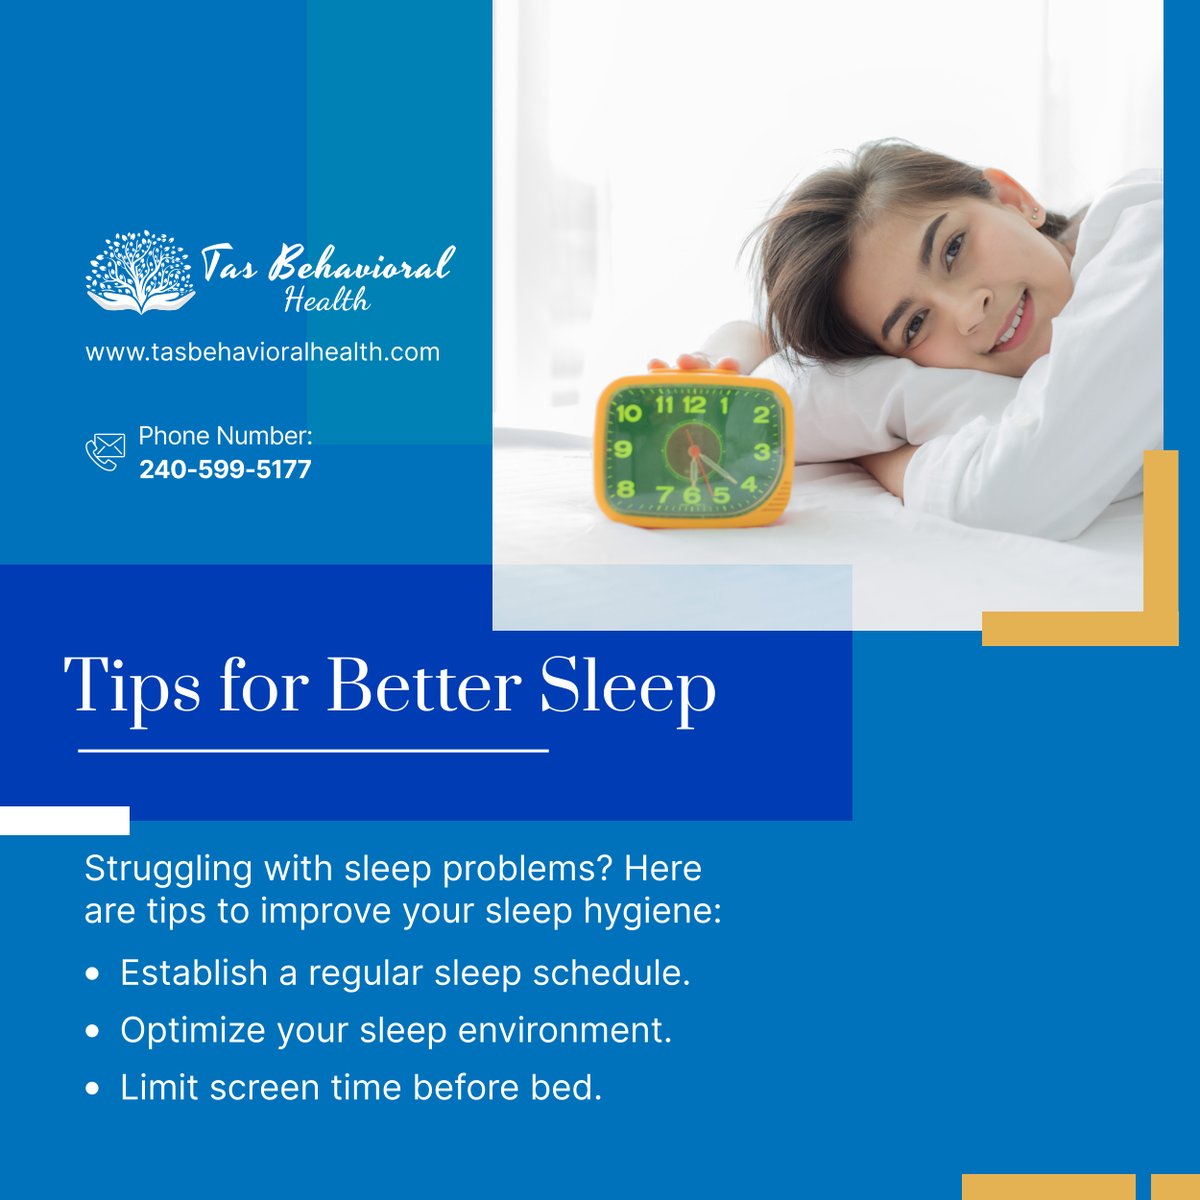 Don't let sleep problems hold you back! These simple tips can help you establish healthy sleep habits and wake up feeling refreshed. #CumberlandMD #MentalHealthClinic #SleepHygiene